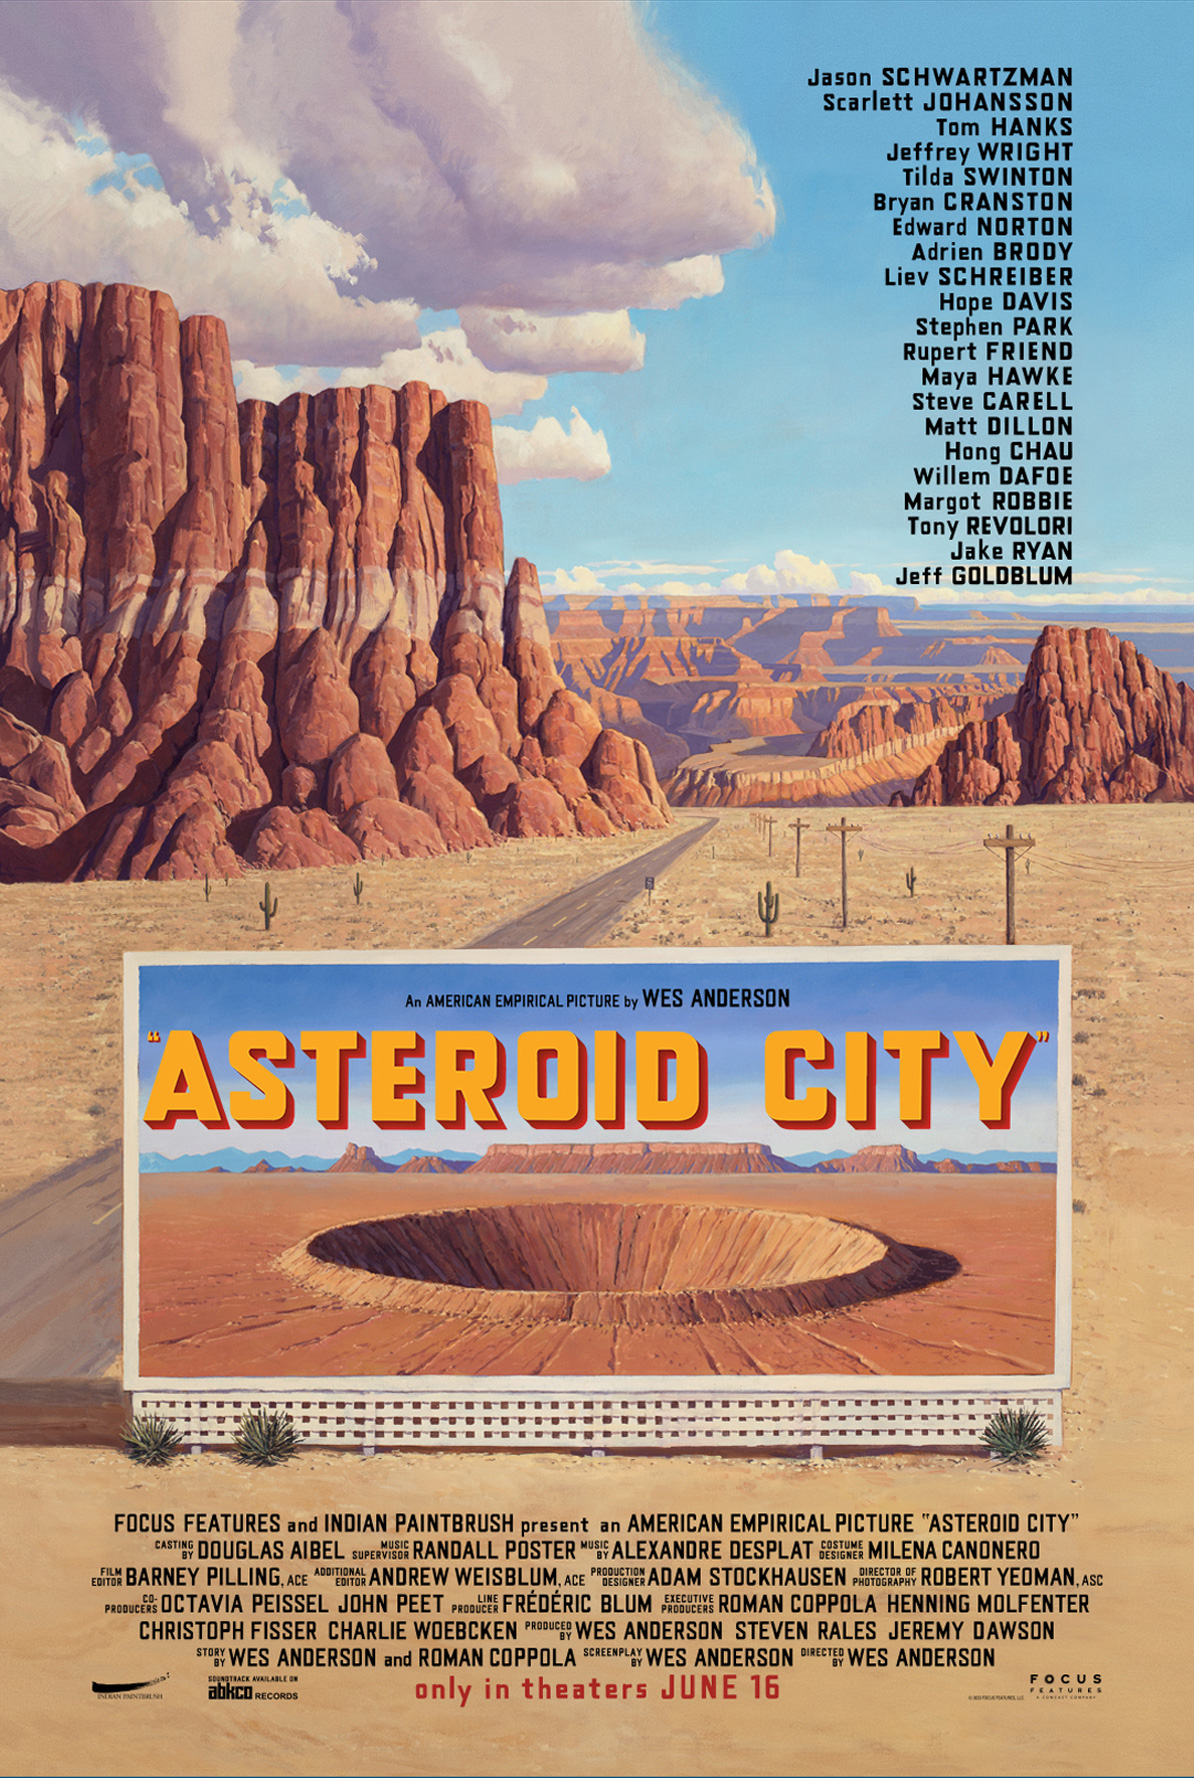 Wes Anderson Goes Sci-Fi in 1950s America: Watch the Trailer for His New Film Asteroid City